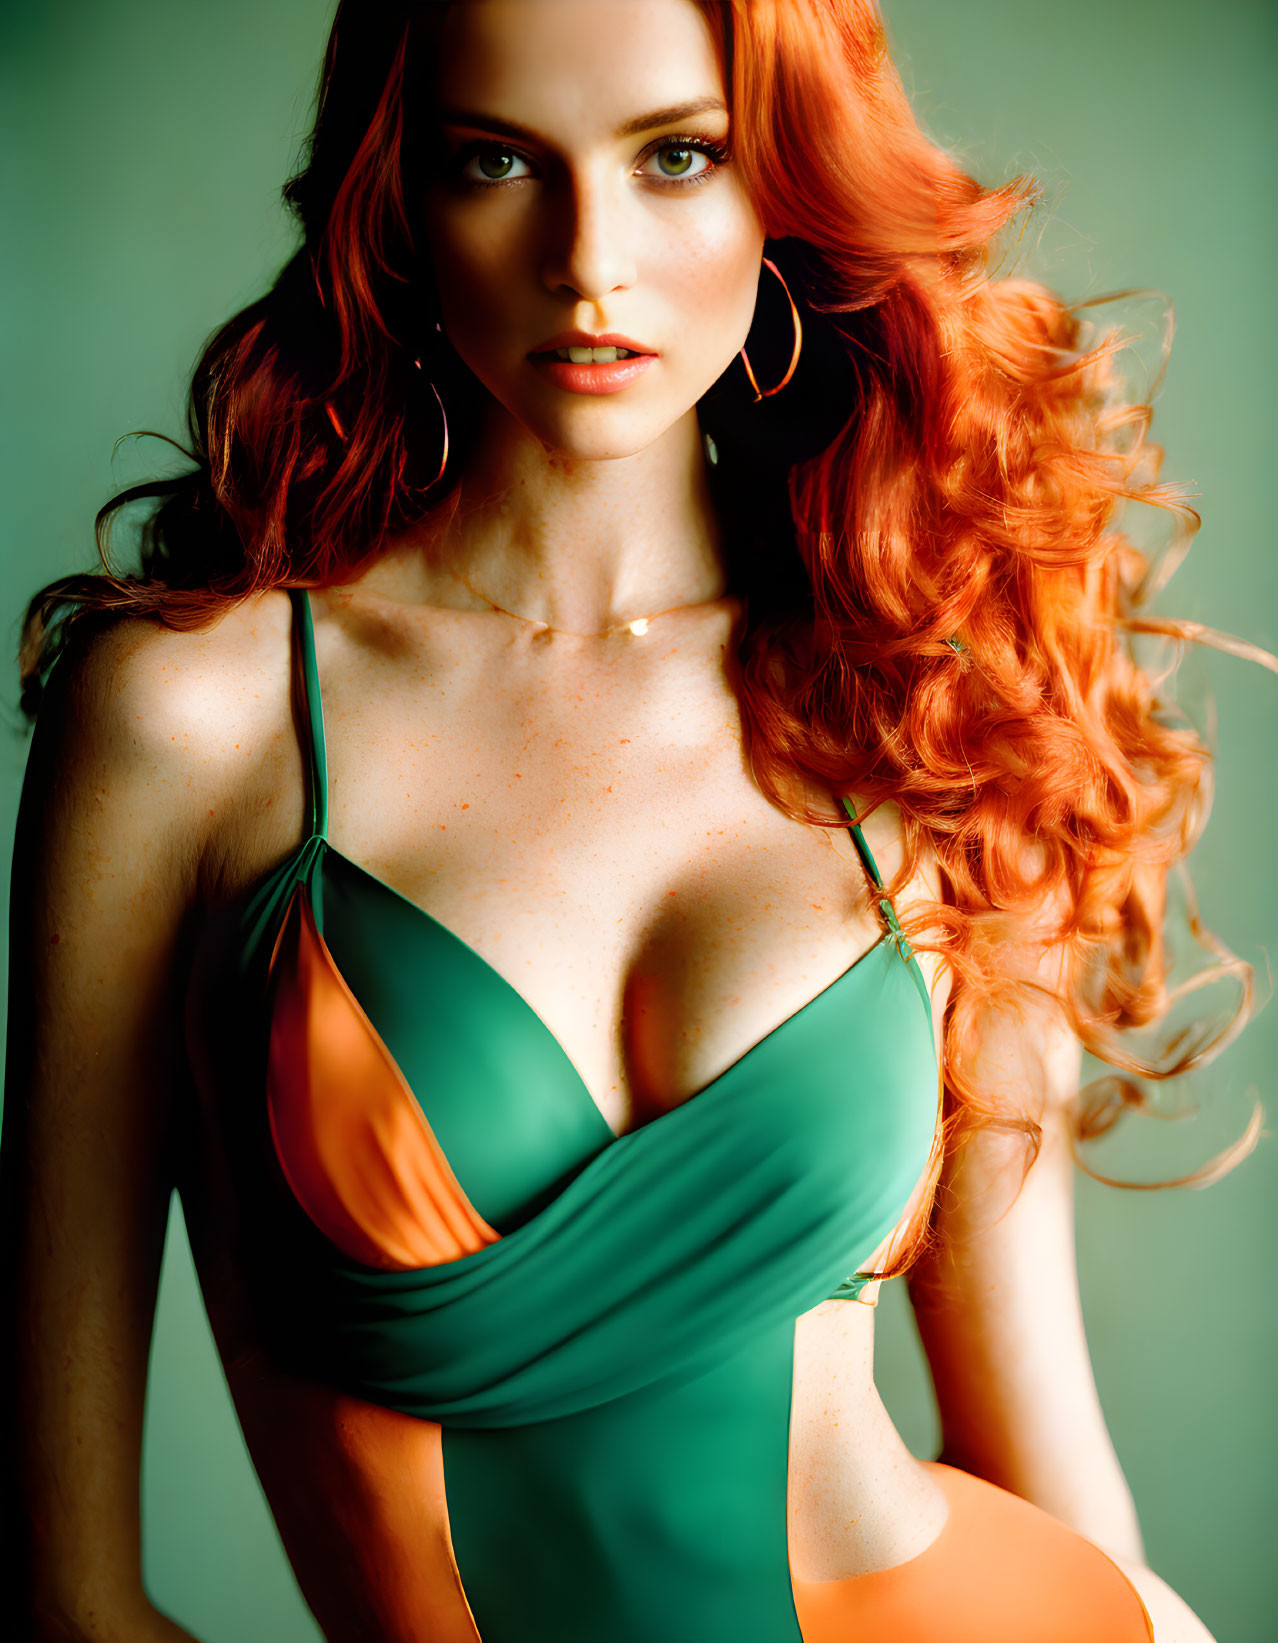 Freckled woman with long red hair in green and orange swimsuit